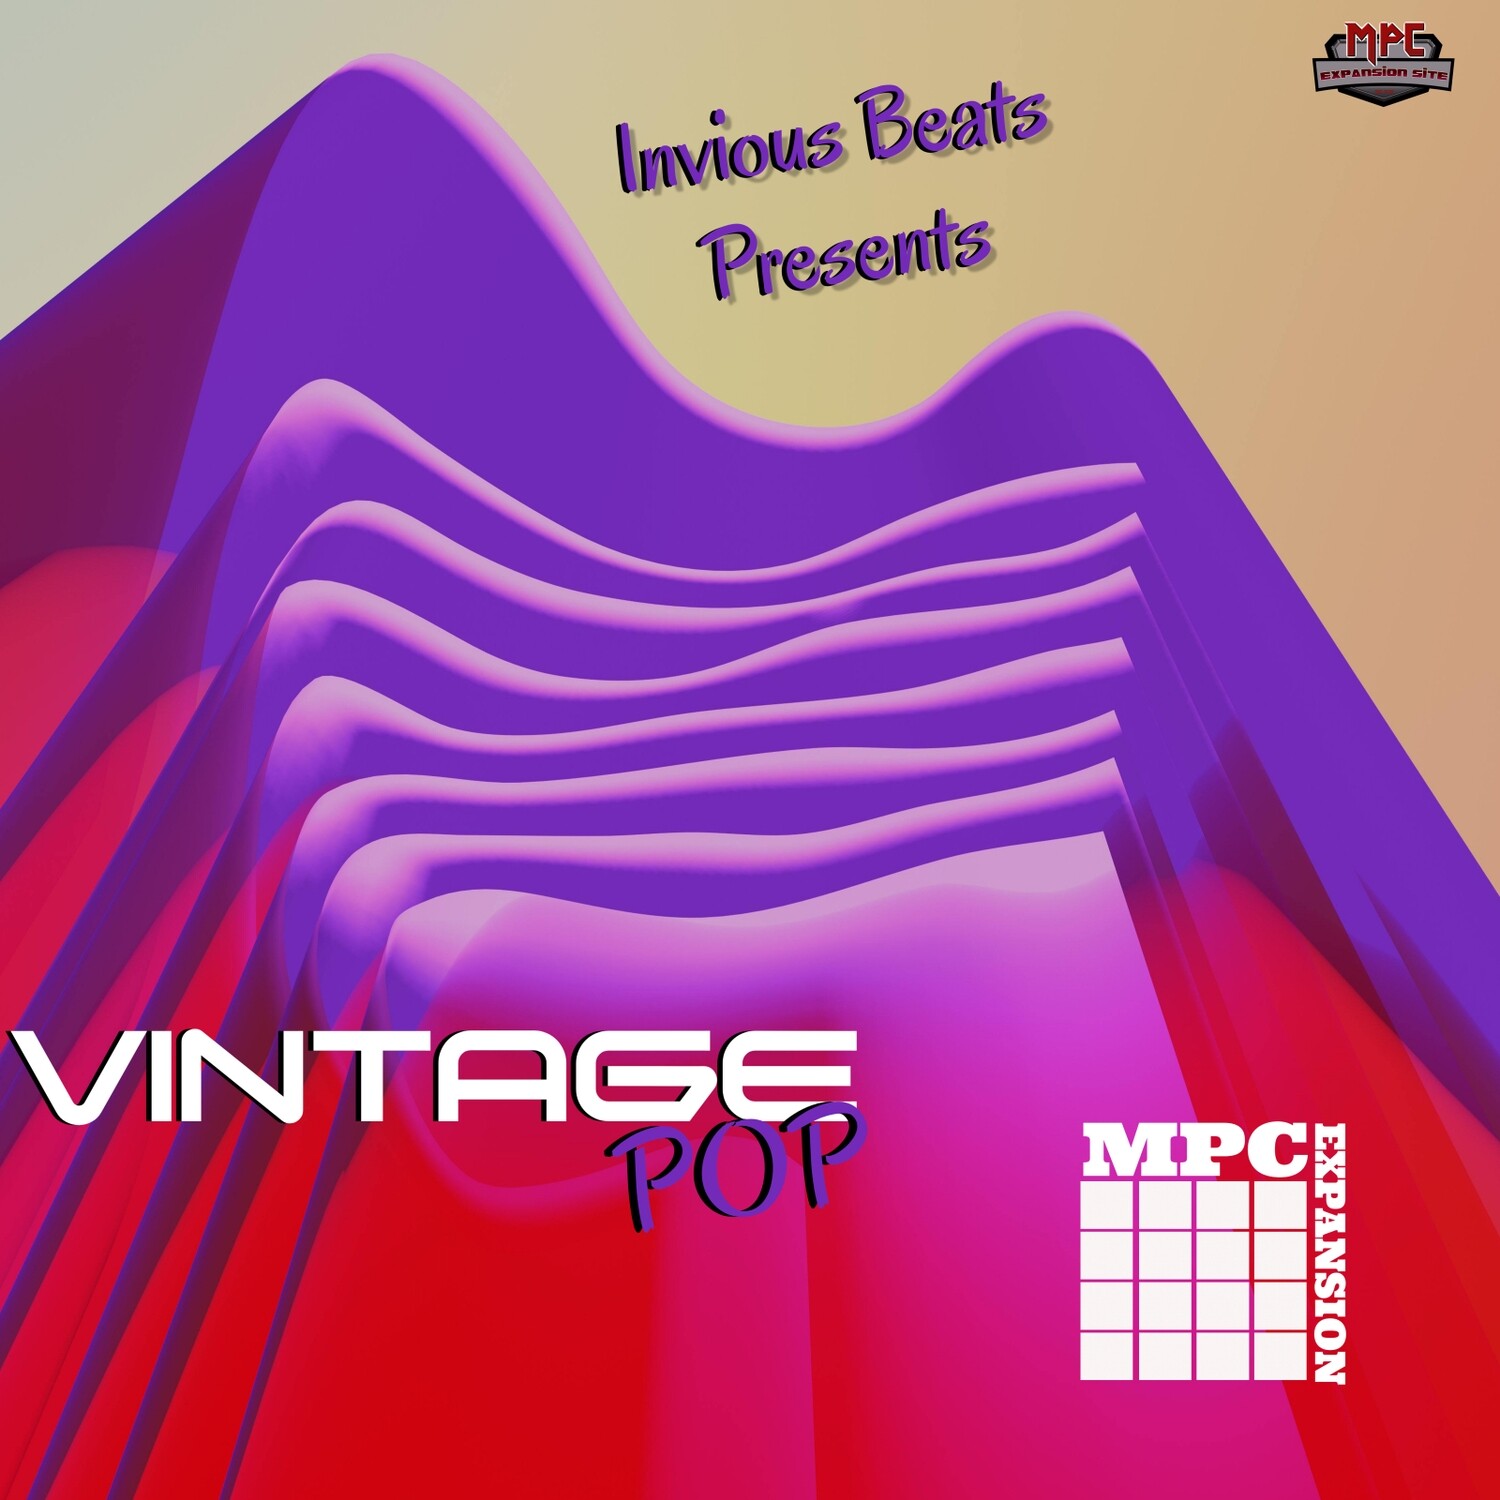 MPC EXPANSION 'VINTAGE POP' by INVIOUS